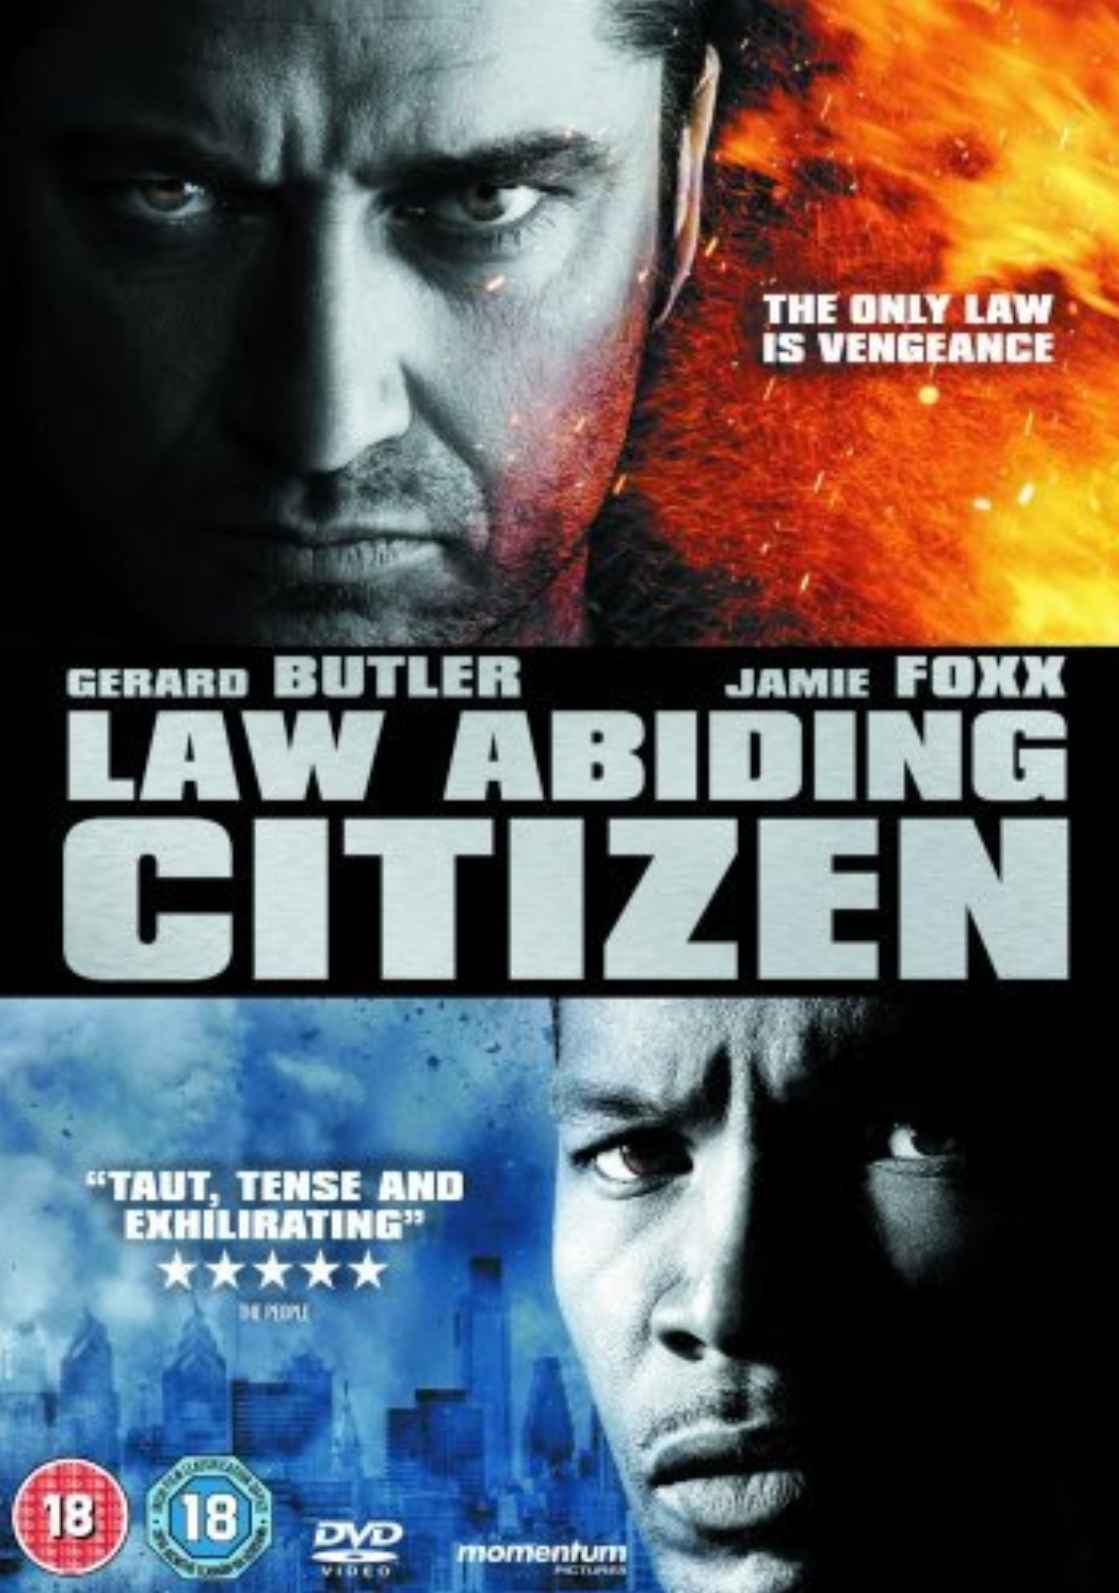 Best Prison Movies You Can't Miss Law Abiding Citizen (2009)